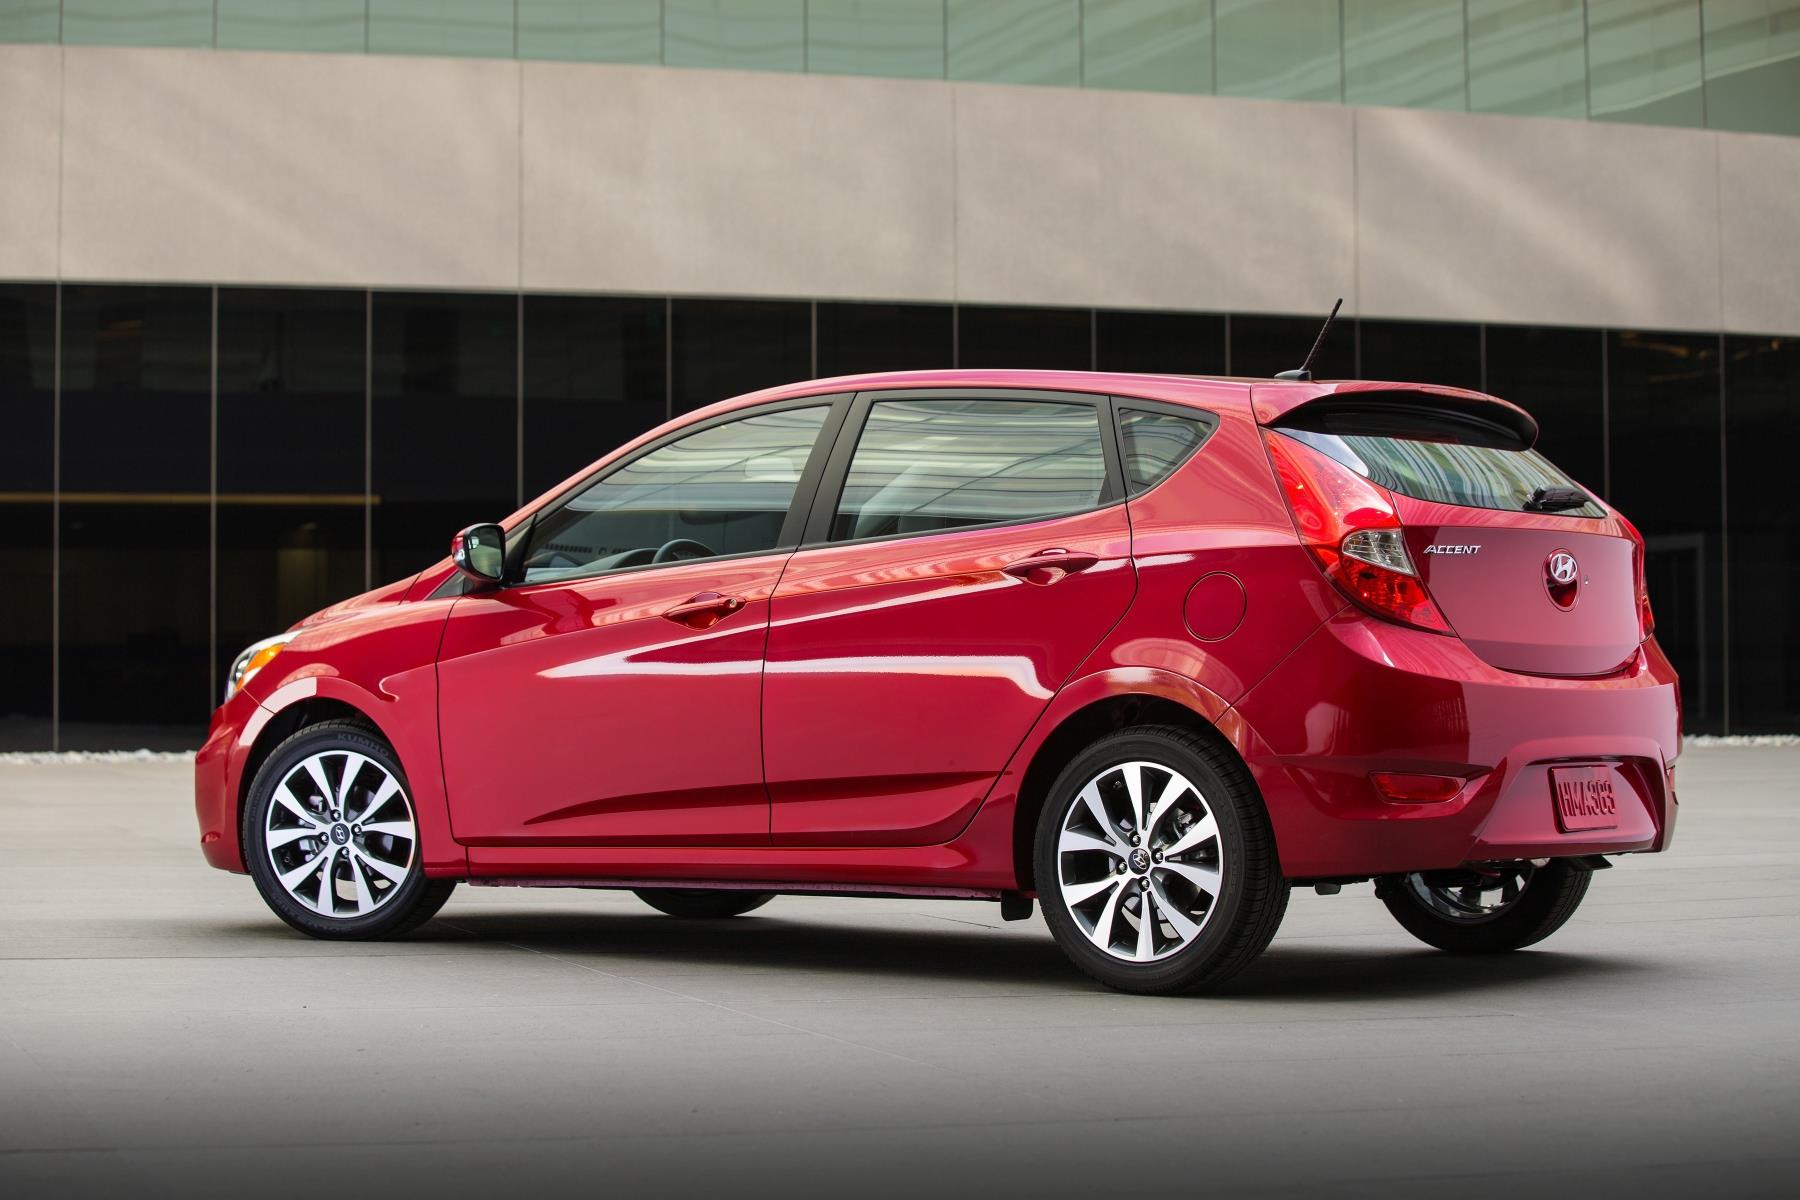 Hyundai Accent Value Edition Is Exactly What the Label Says - autoevolution